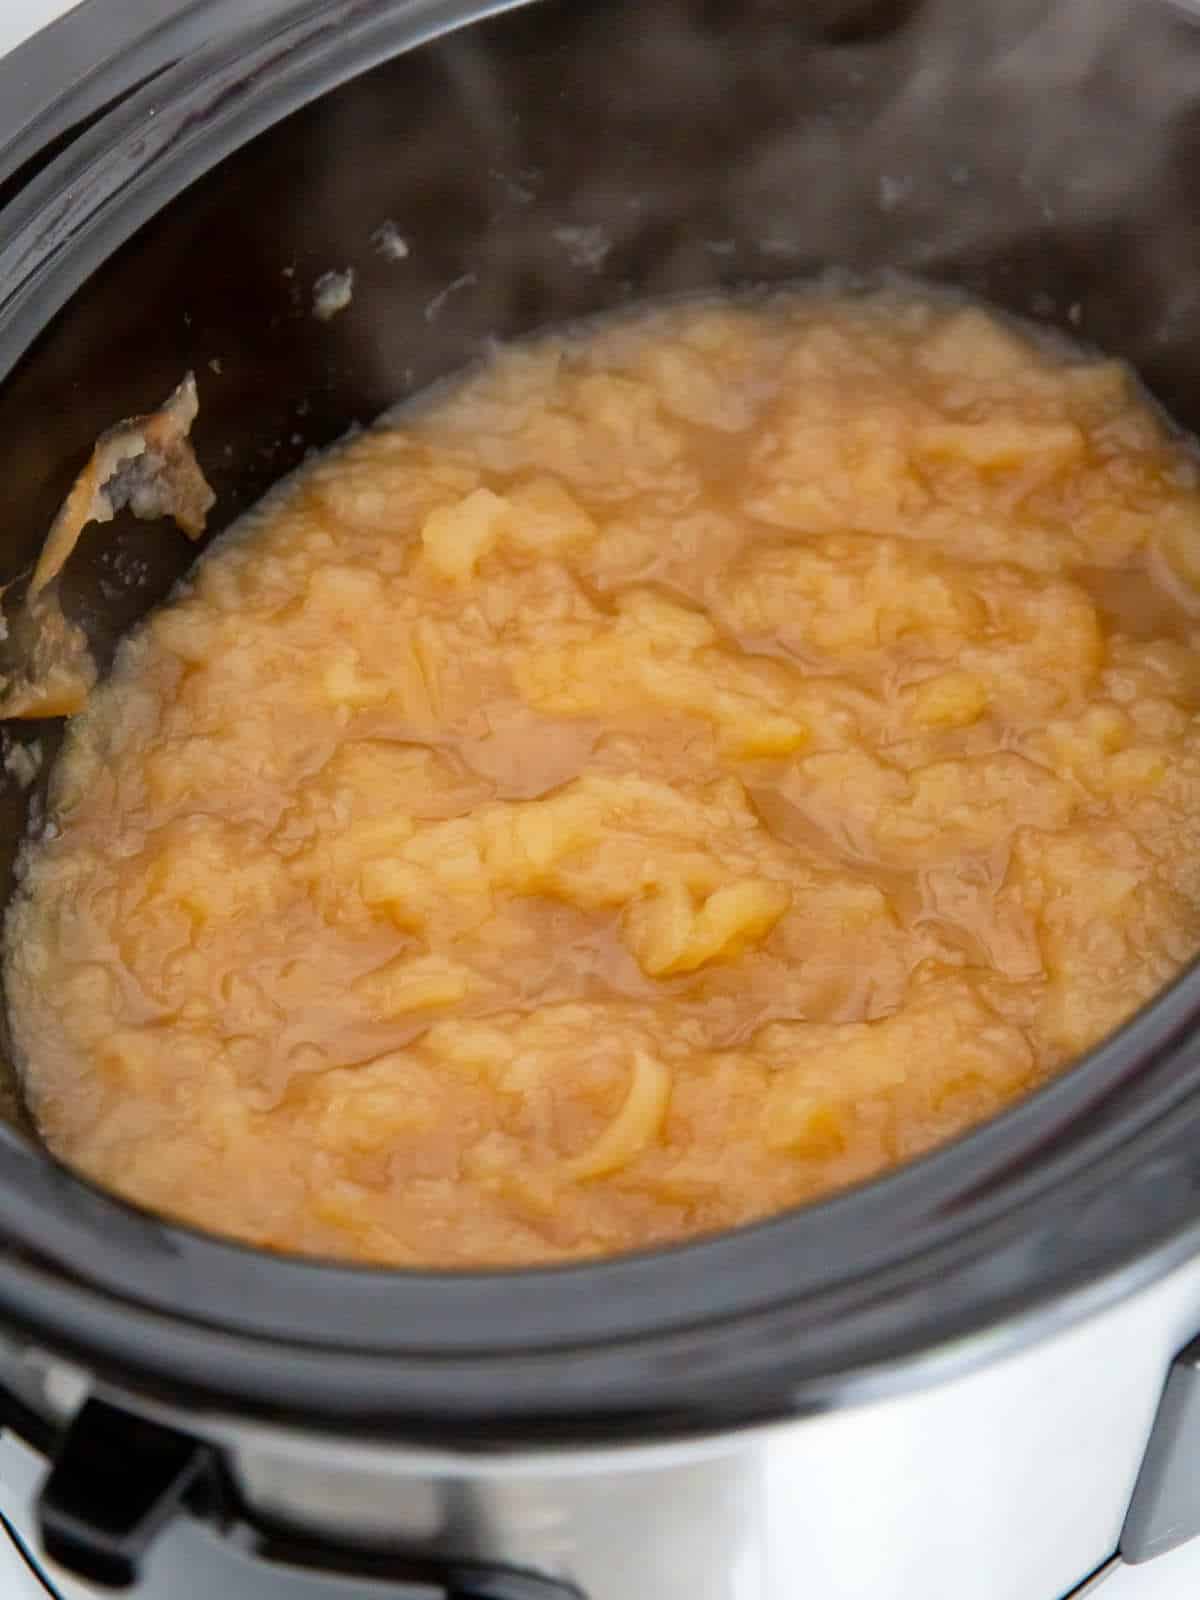 cooked apples turning to the mushy, sauce stage with no sugar and no spices.